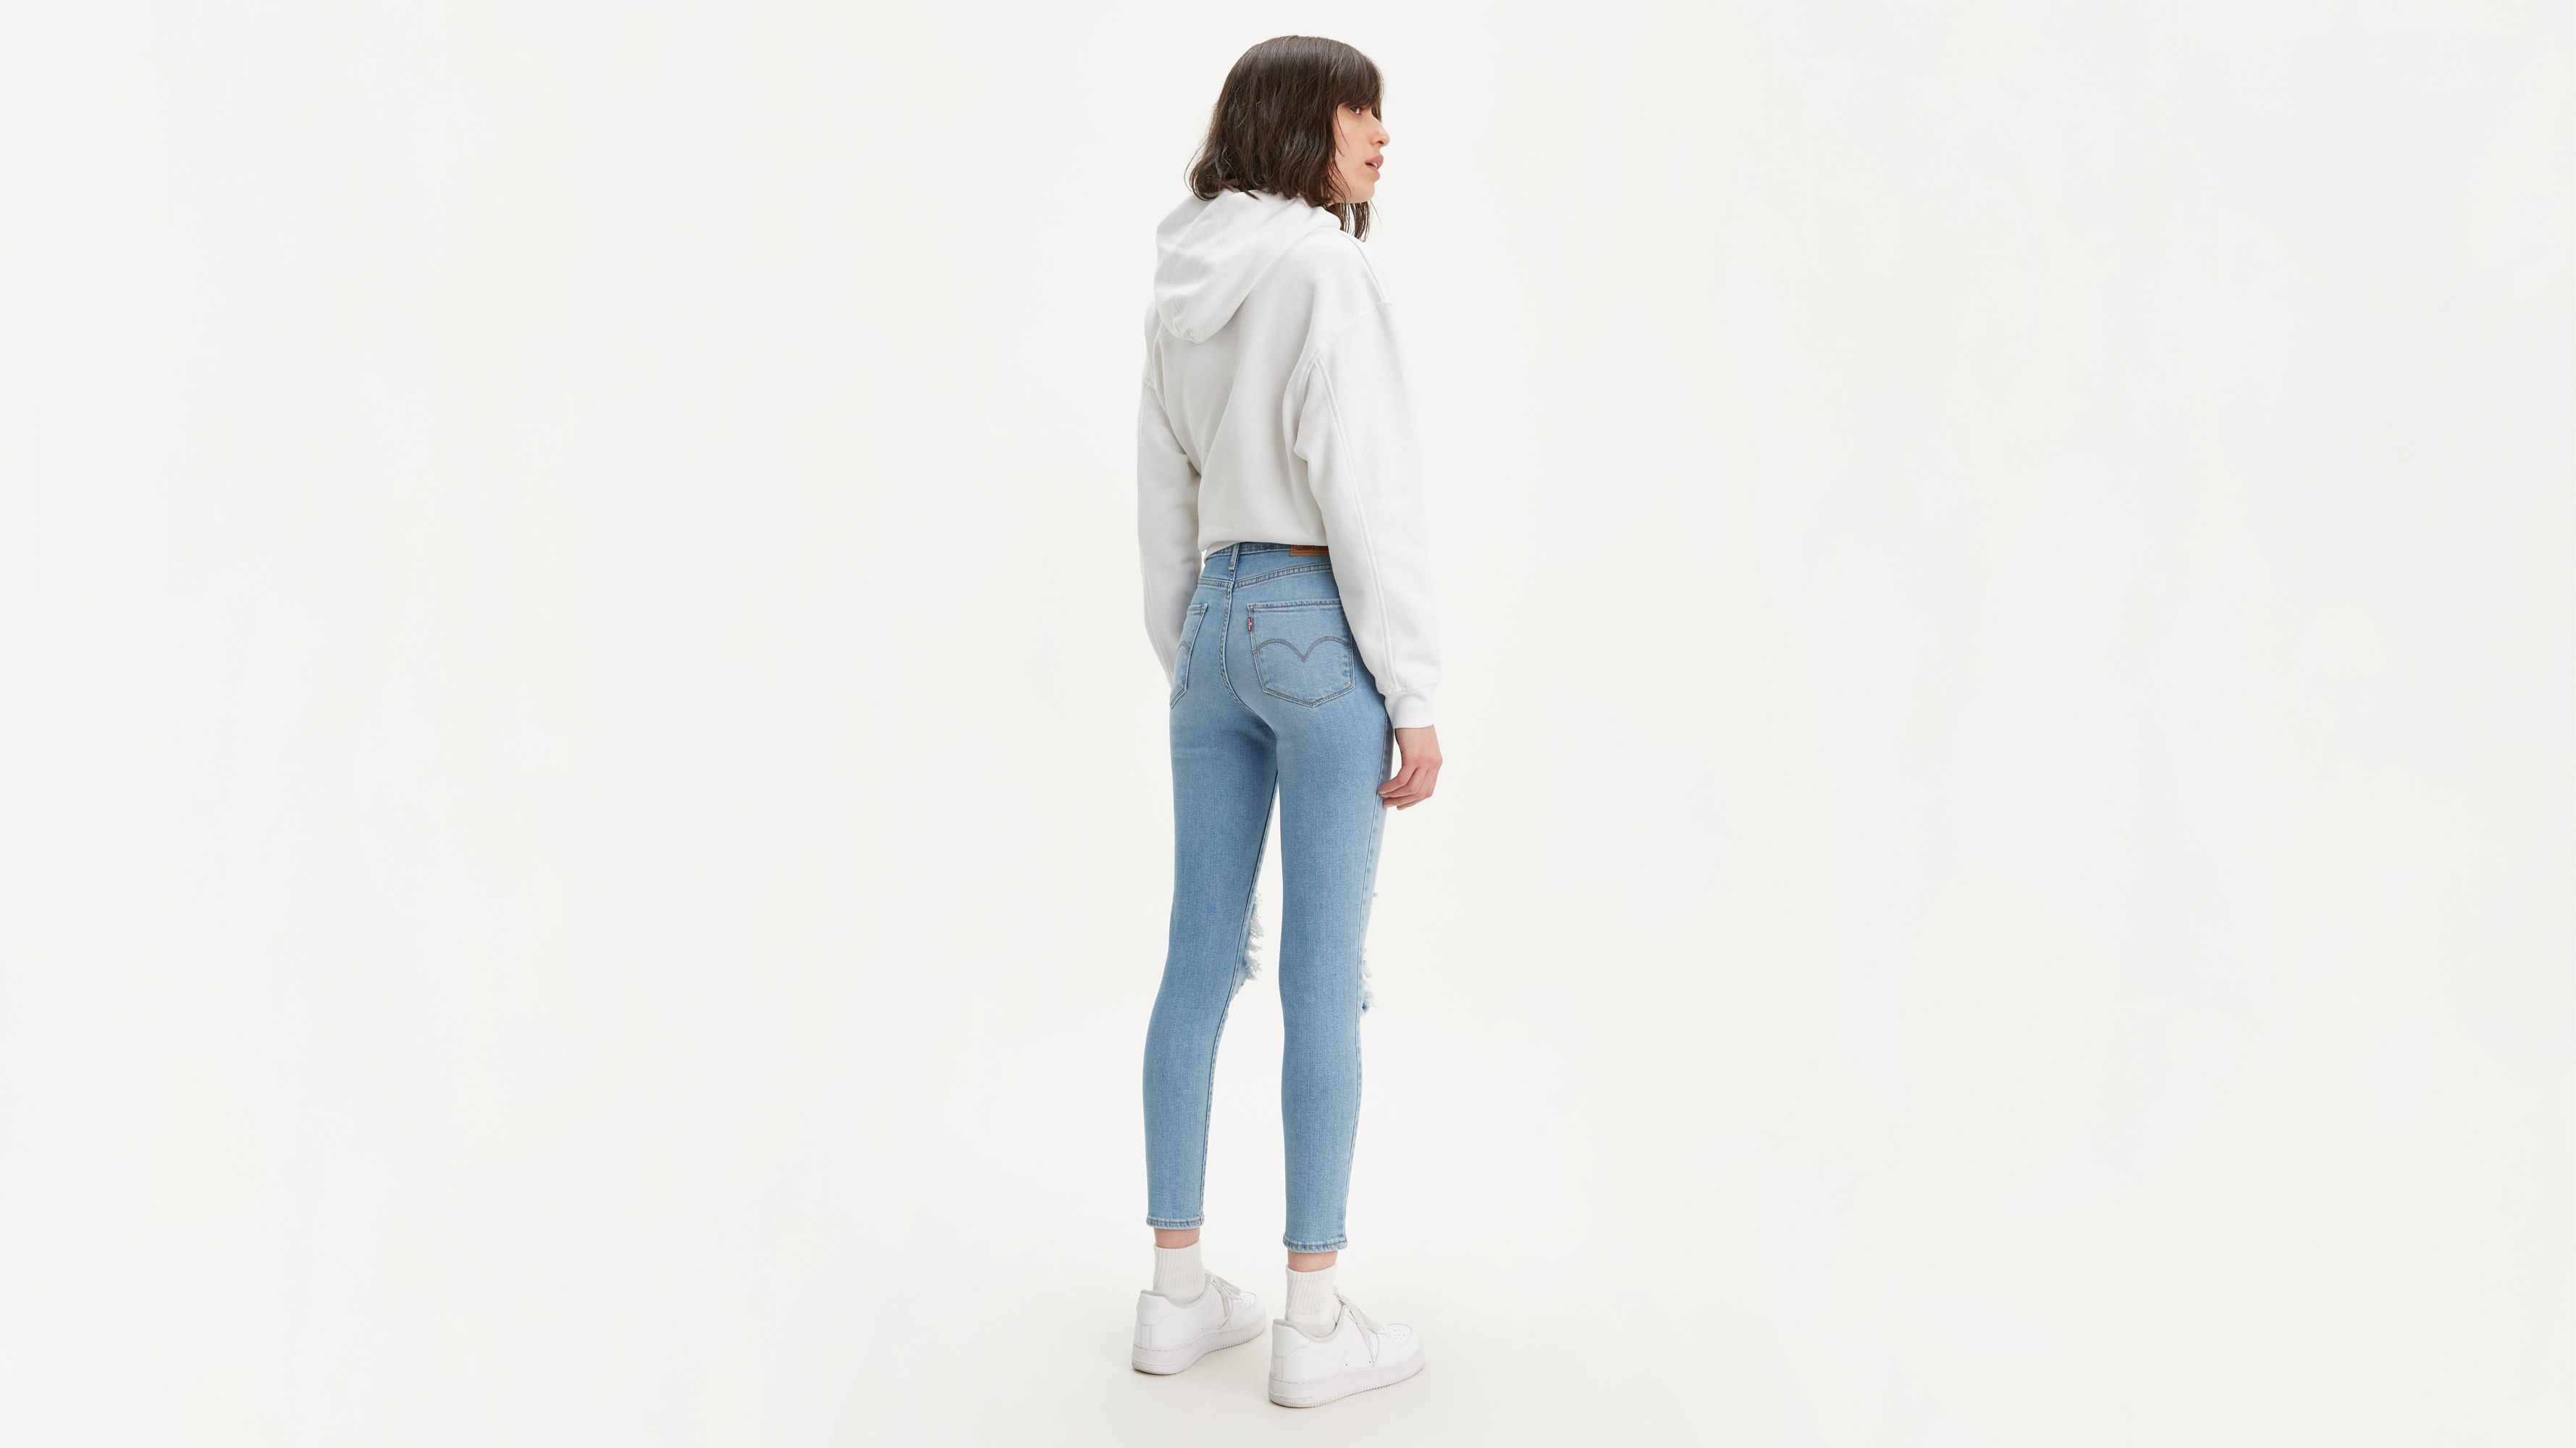 levi's 721 high rise ankle skinny